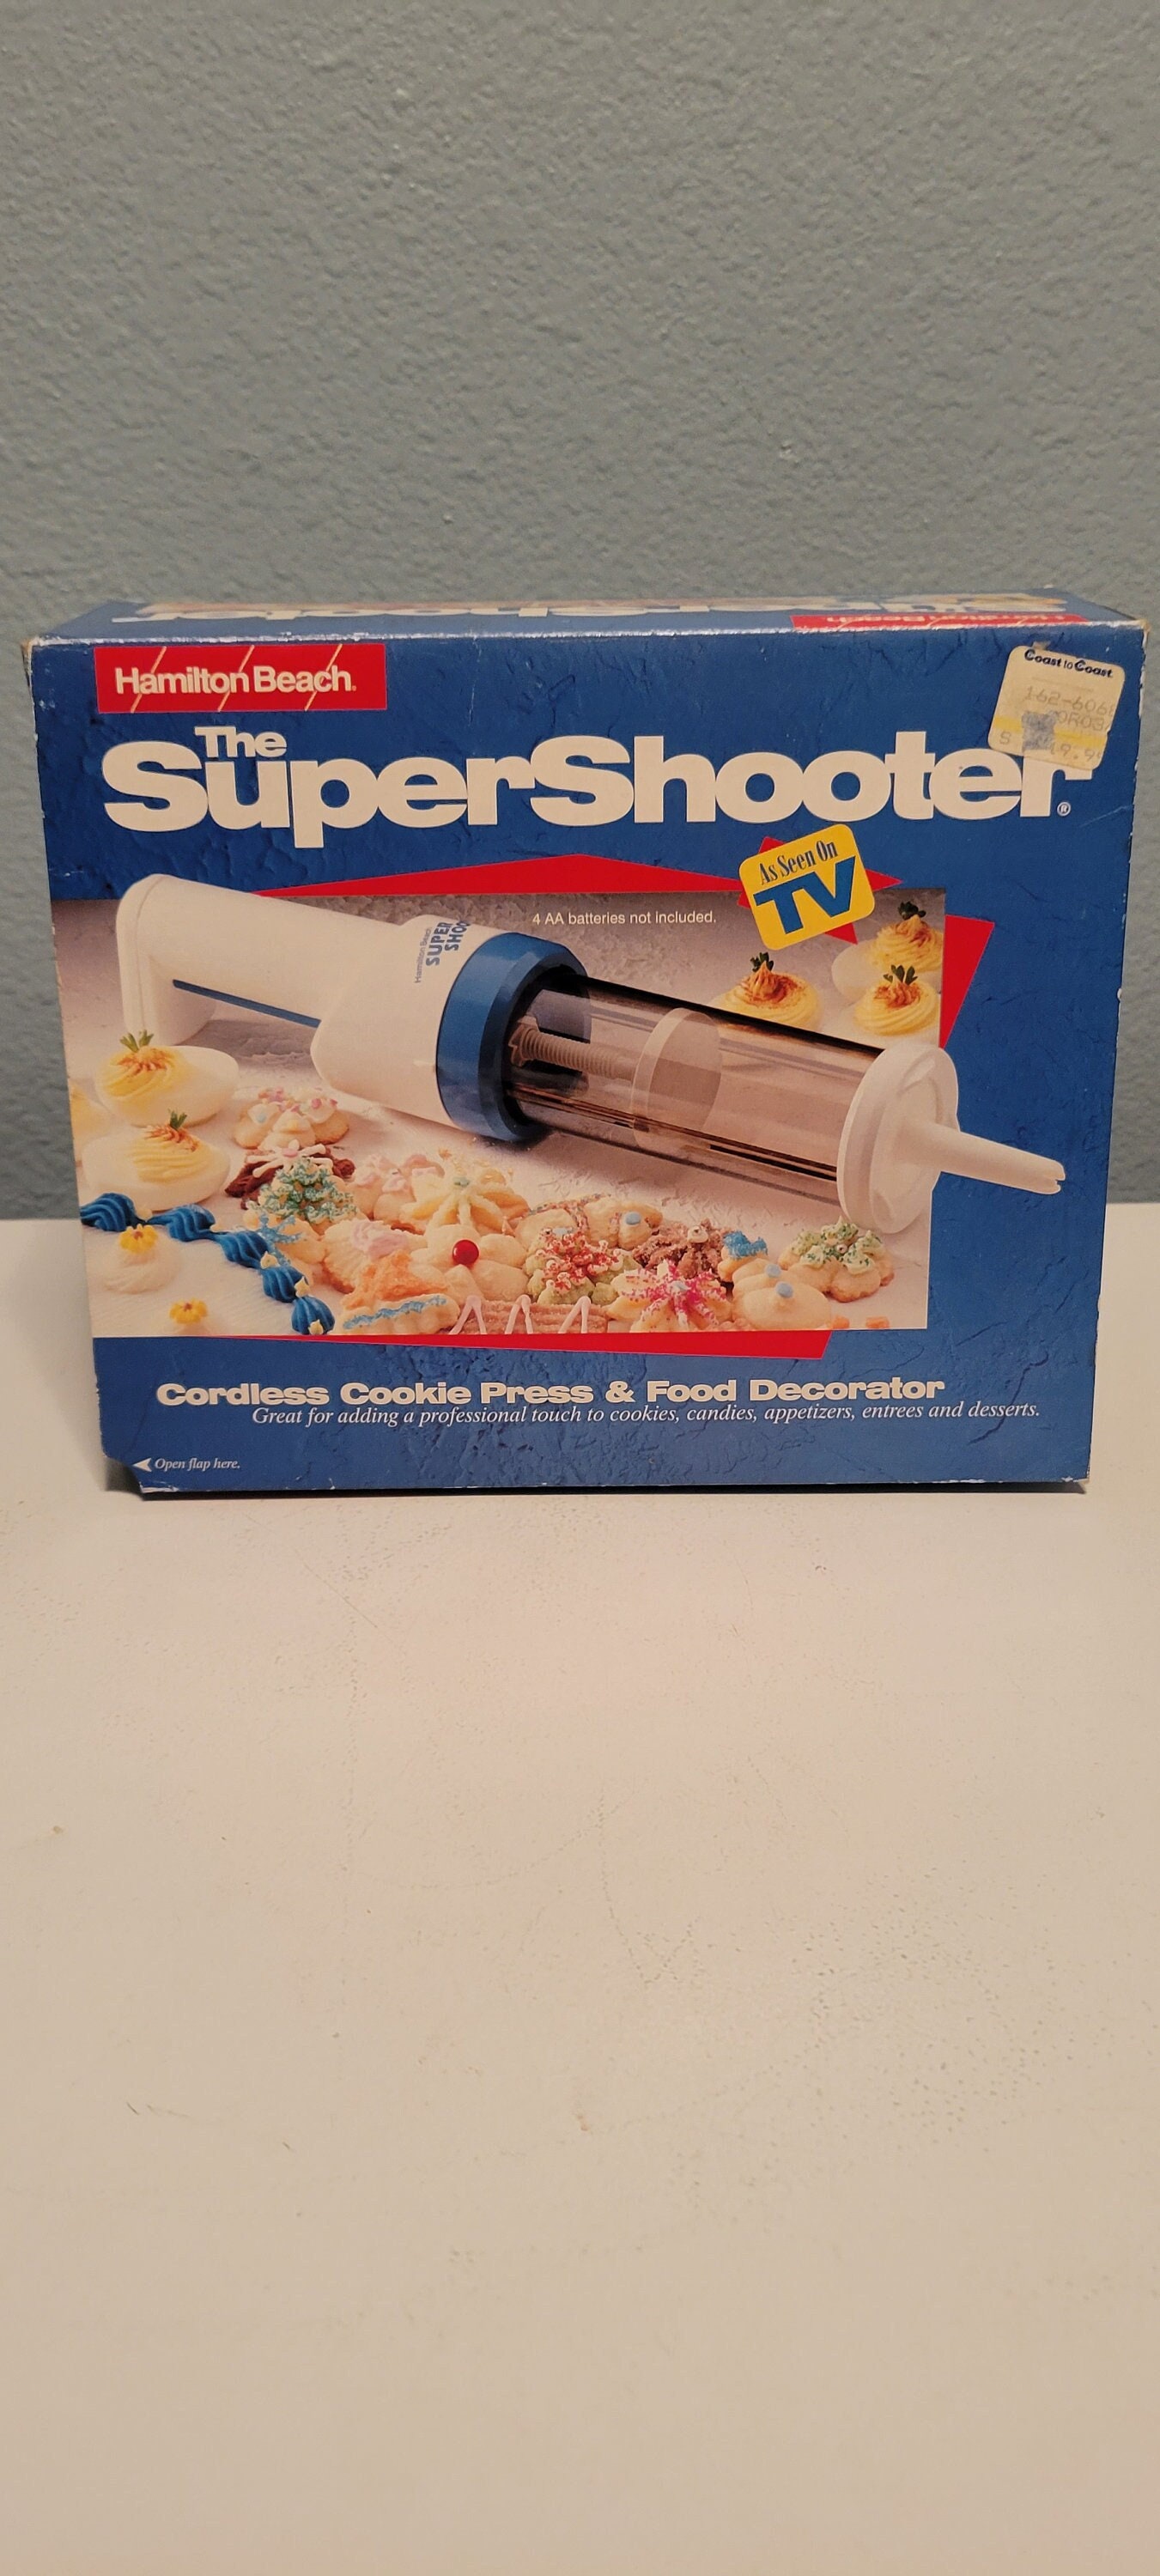  REPLACEMNET FOR Super Shooter Cookie Press & Food Decorator by Hamilton  Beach: Hamilton Beach Super Shooter: Home & Kitchen